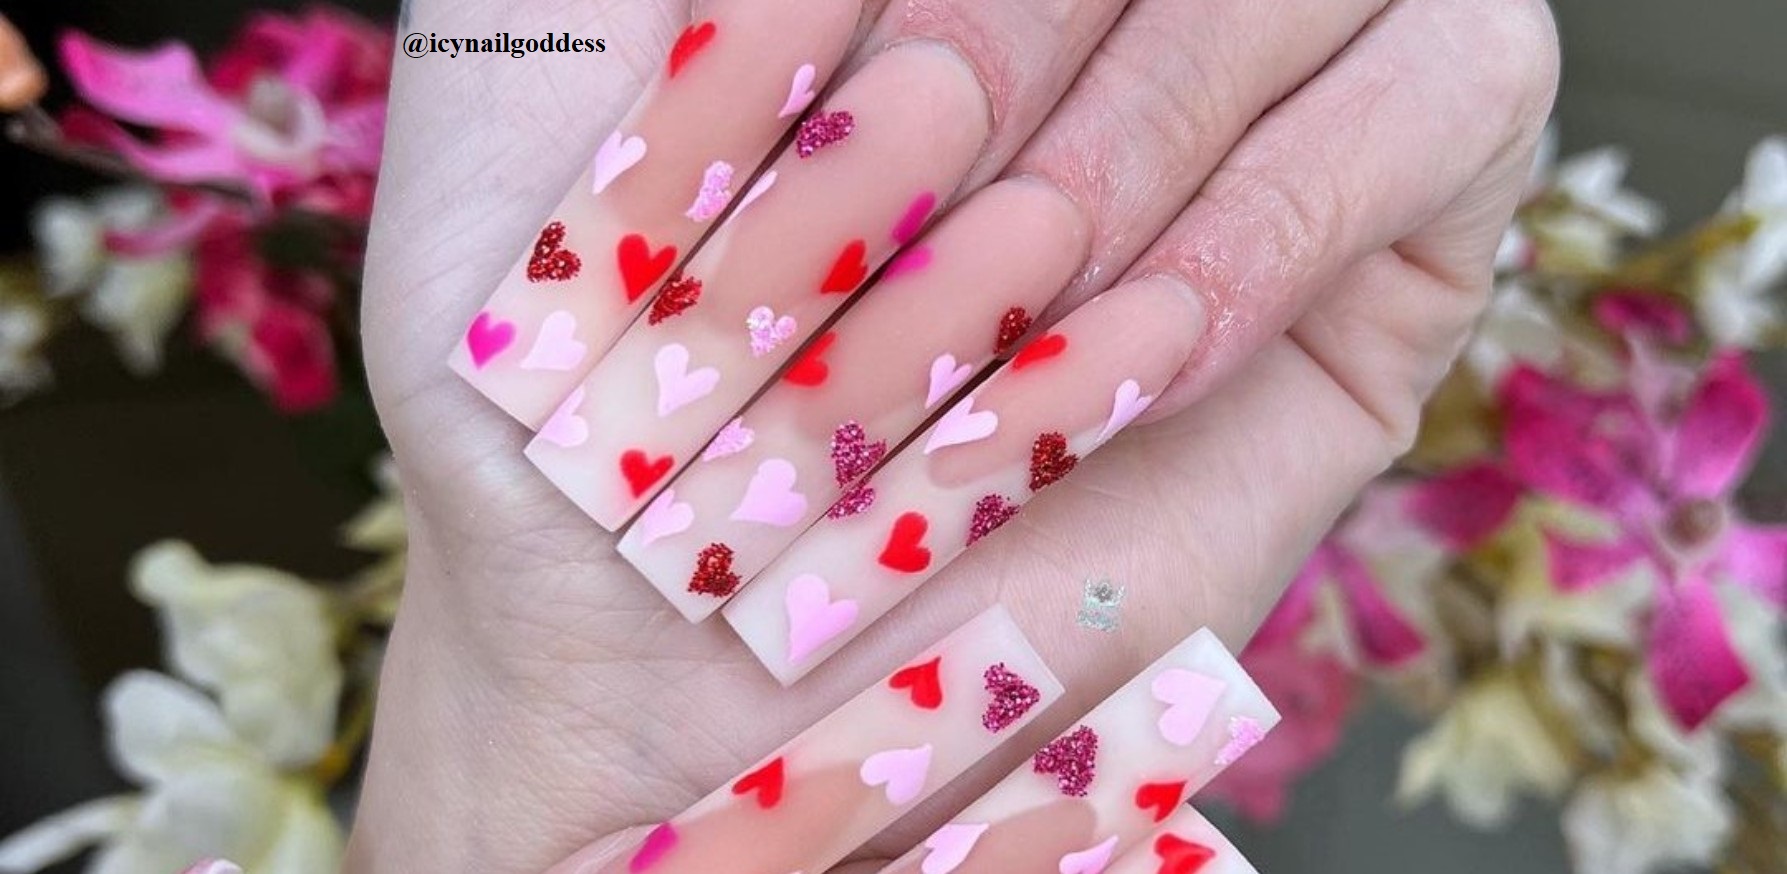 Forget Basic Pink Nails! Up Your Nail Game With These Pink Glam Nails